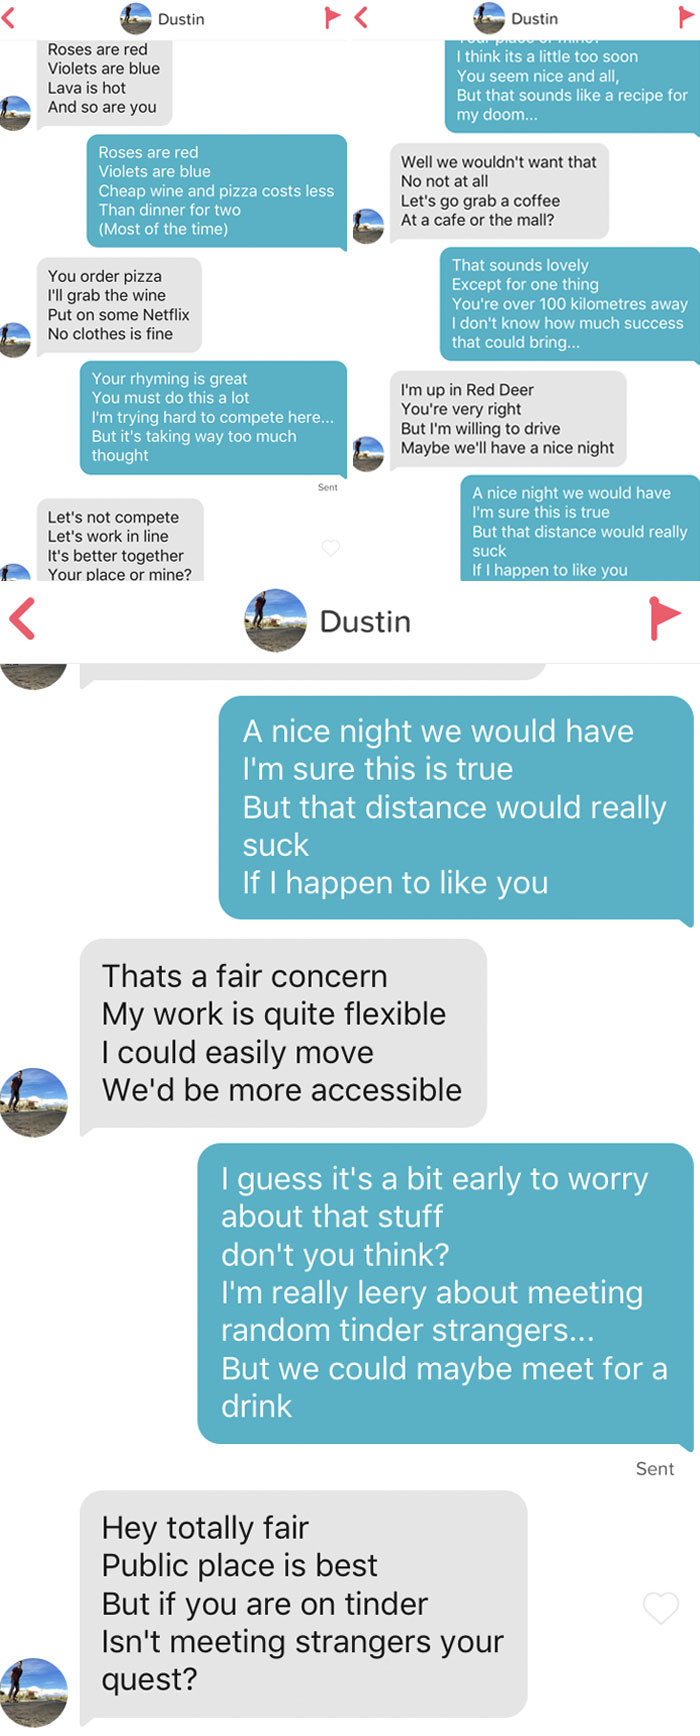 How to open up a conversation on tinder